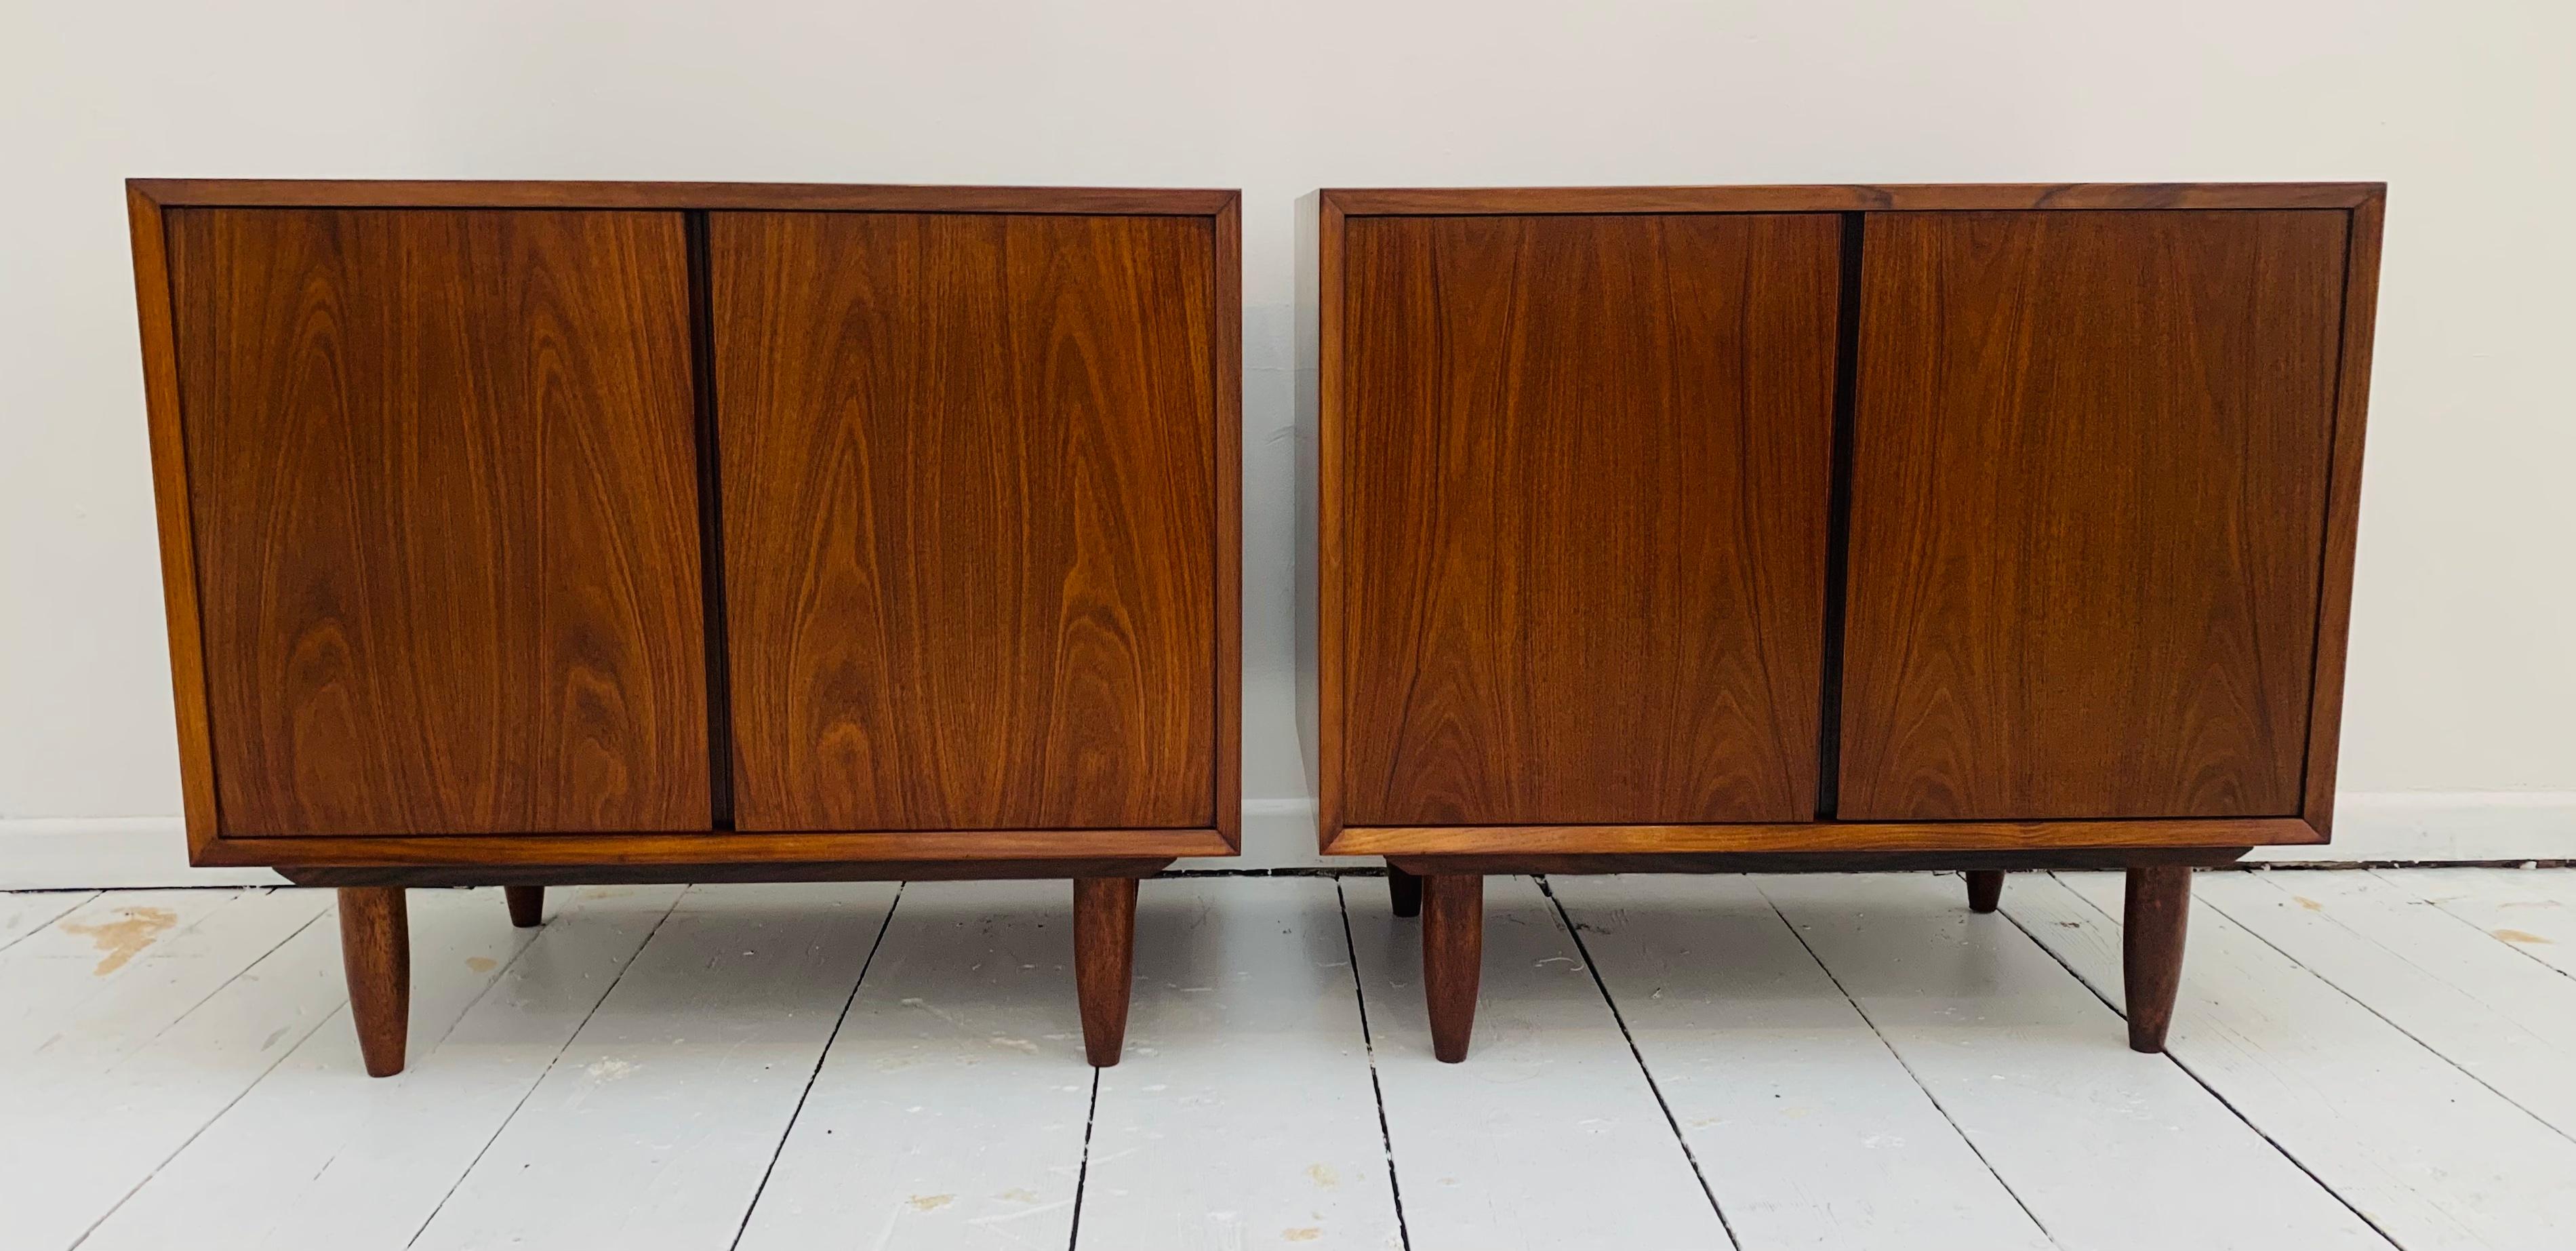 A wonderful pair of 1960s Danish Rosewood cabinets, small sideboards or cupboards designed by Poul Cadovius for Cado.

The cabinets have been fully restored to enhance the beautiful veneered rosewood grain with matching interiors. A single shelf